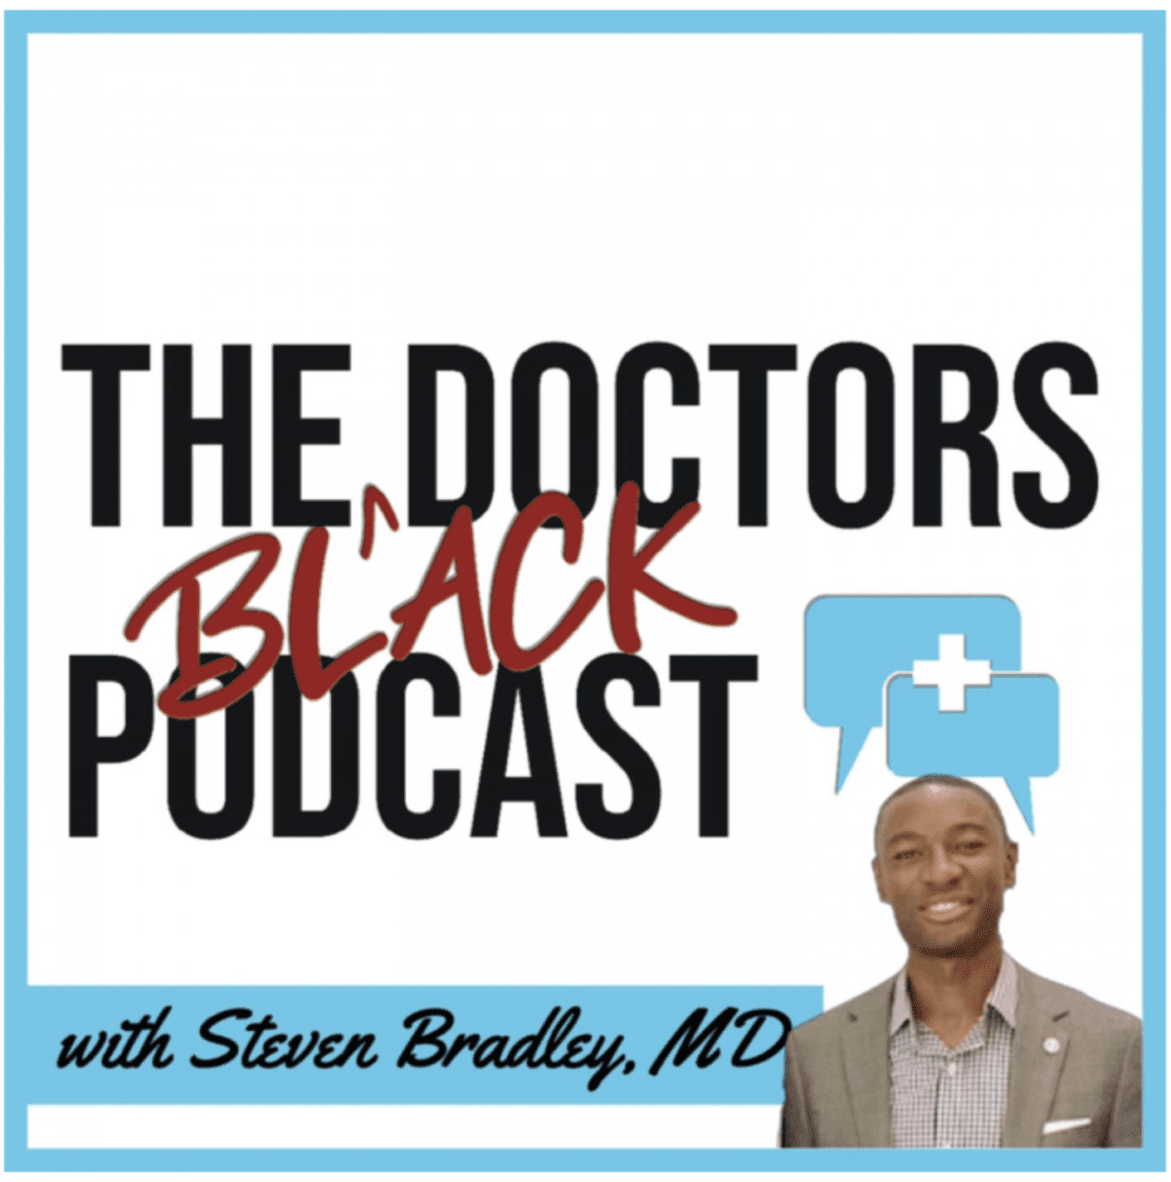 Black Podcasting - Advice for Aspiring Dermatologists and Inspiring Change Through Music